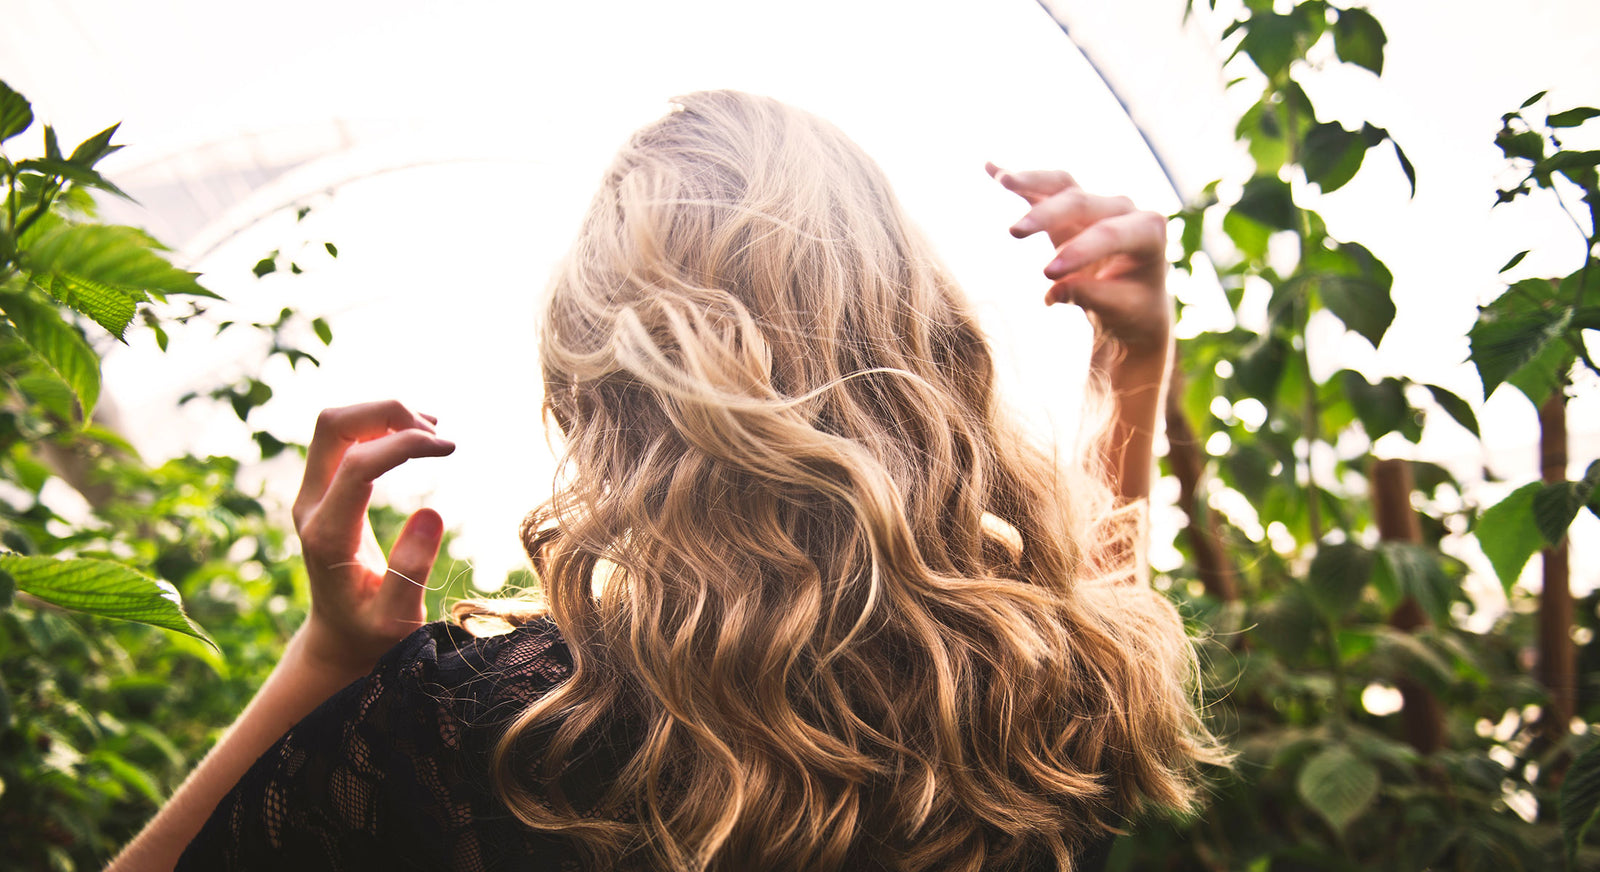 The Best Ways to Use Jojoba For Your Hair